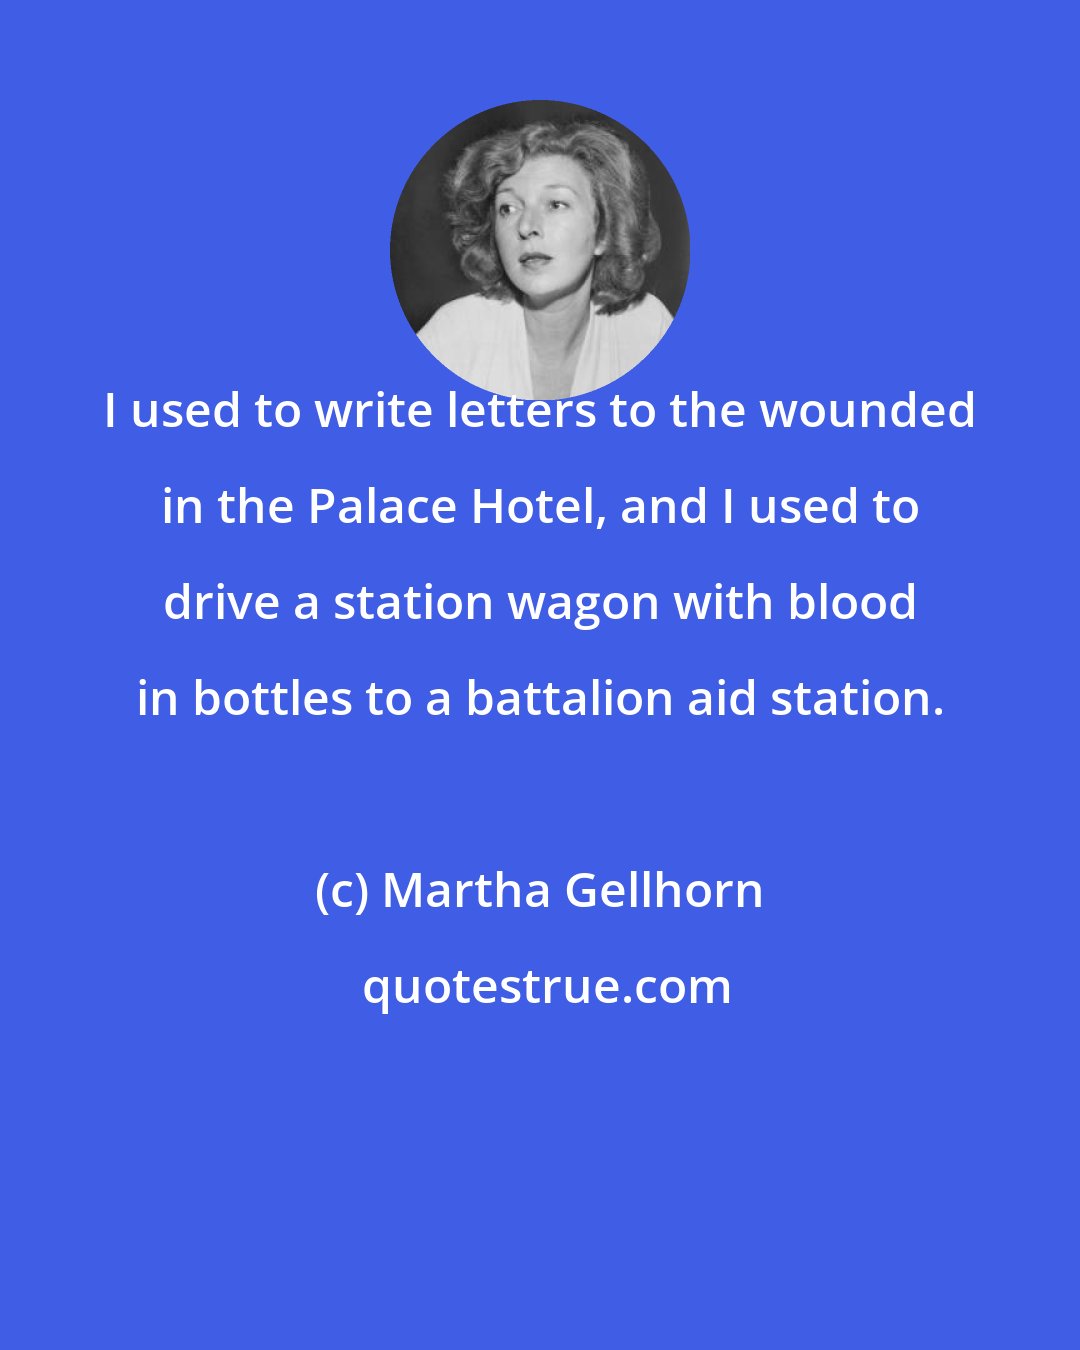 Martha Gellhorn: I used to write letters to the wounded in the Palace Hotel, and I used to drive a station wagon with blood in bottles to a battalion aid station.